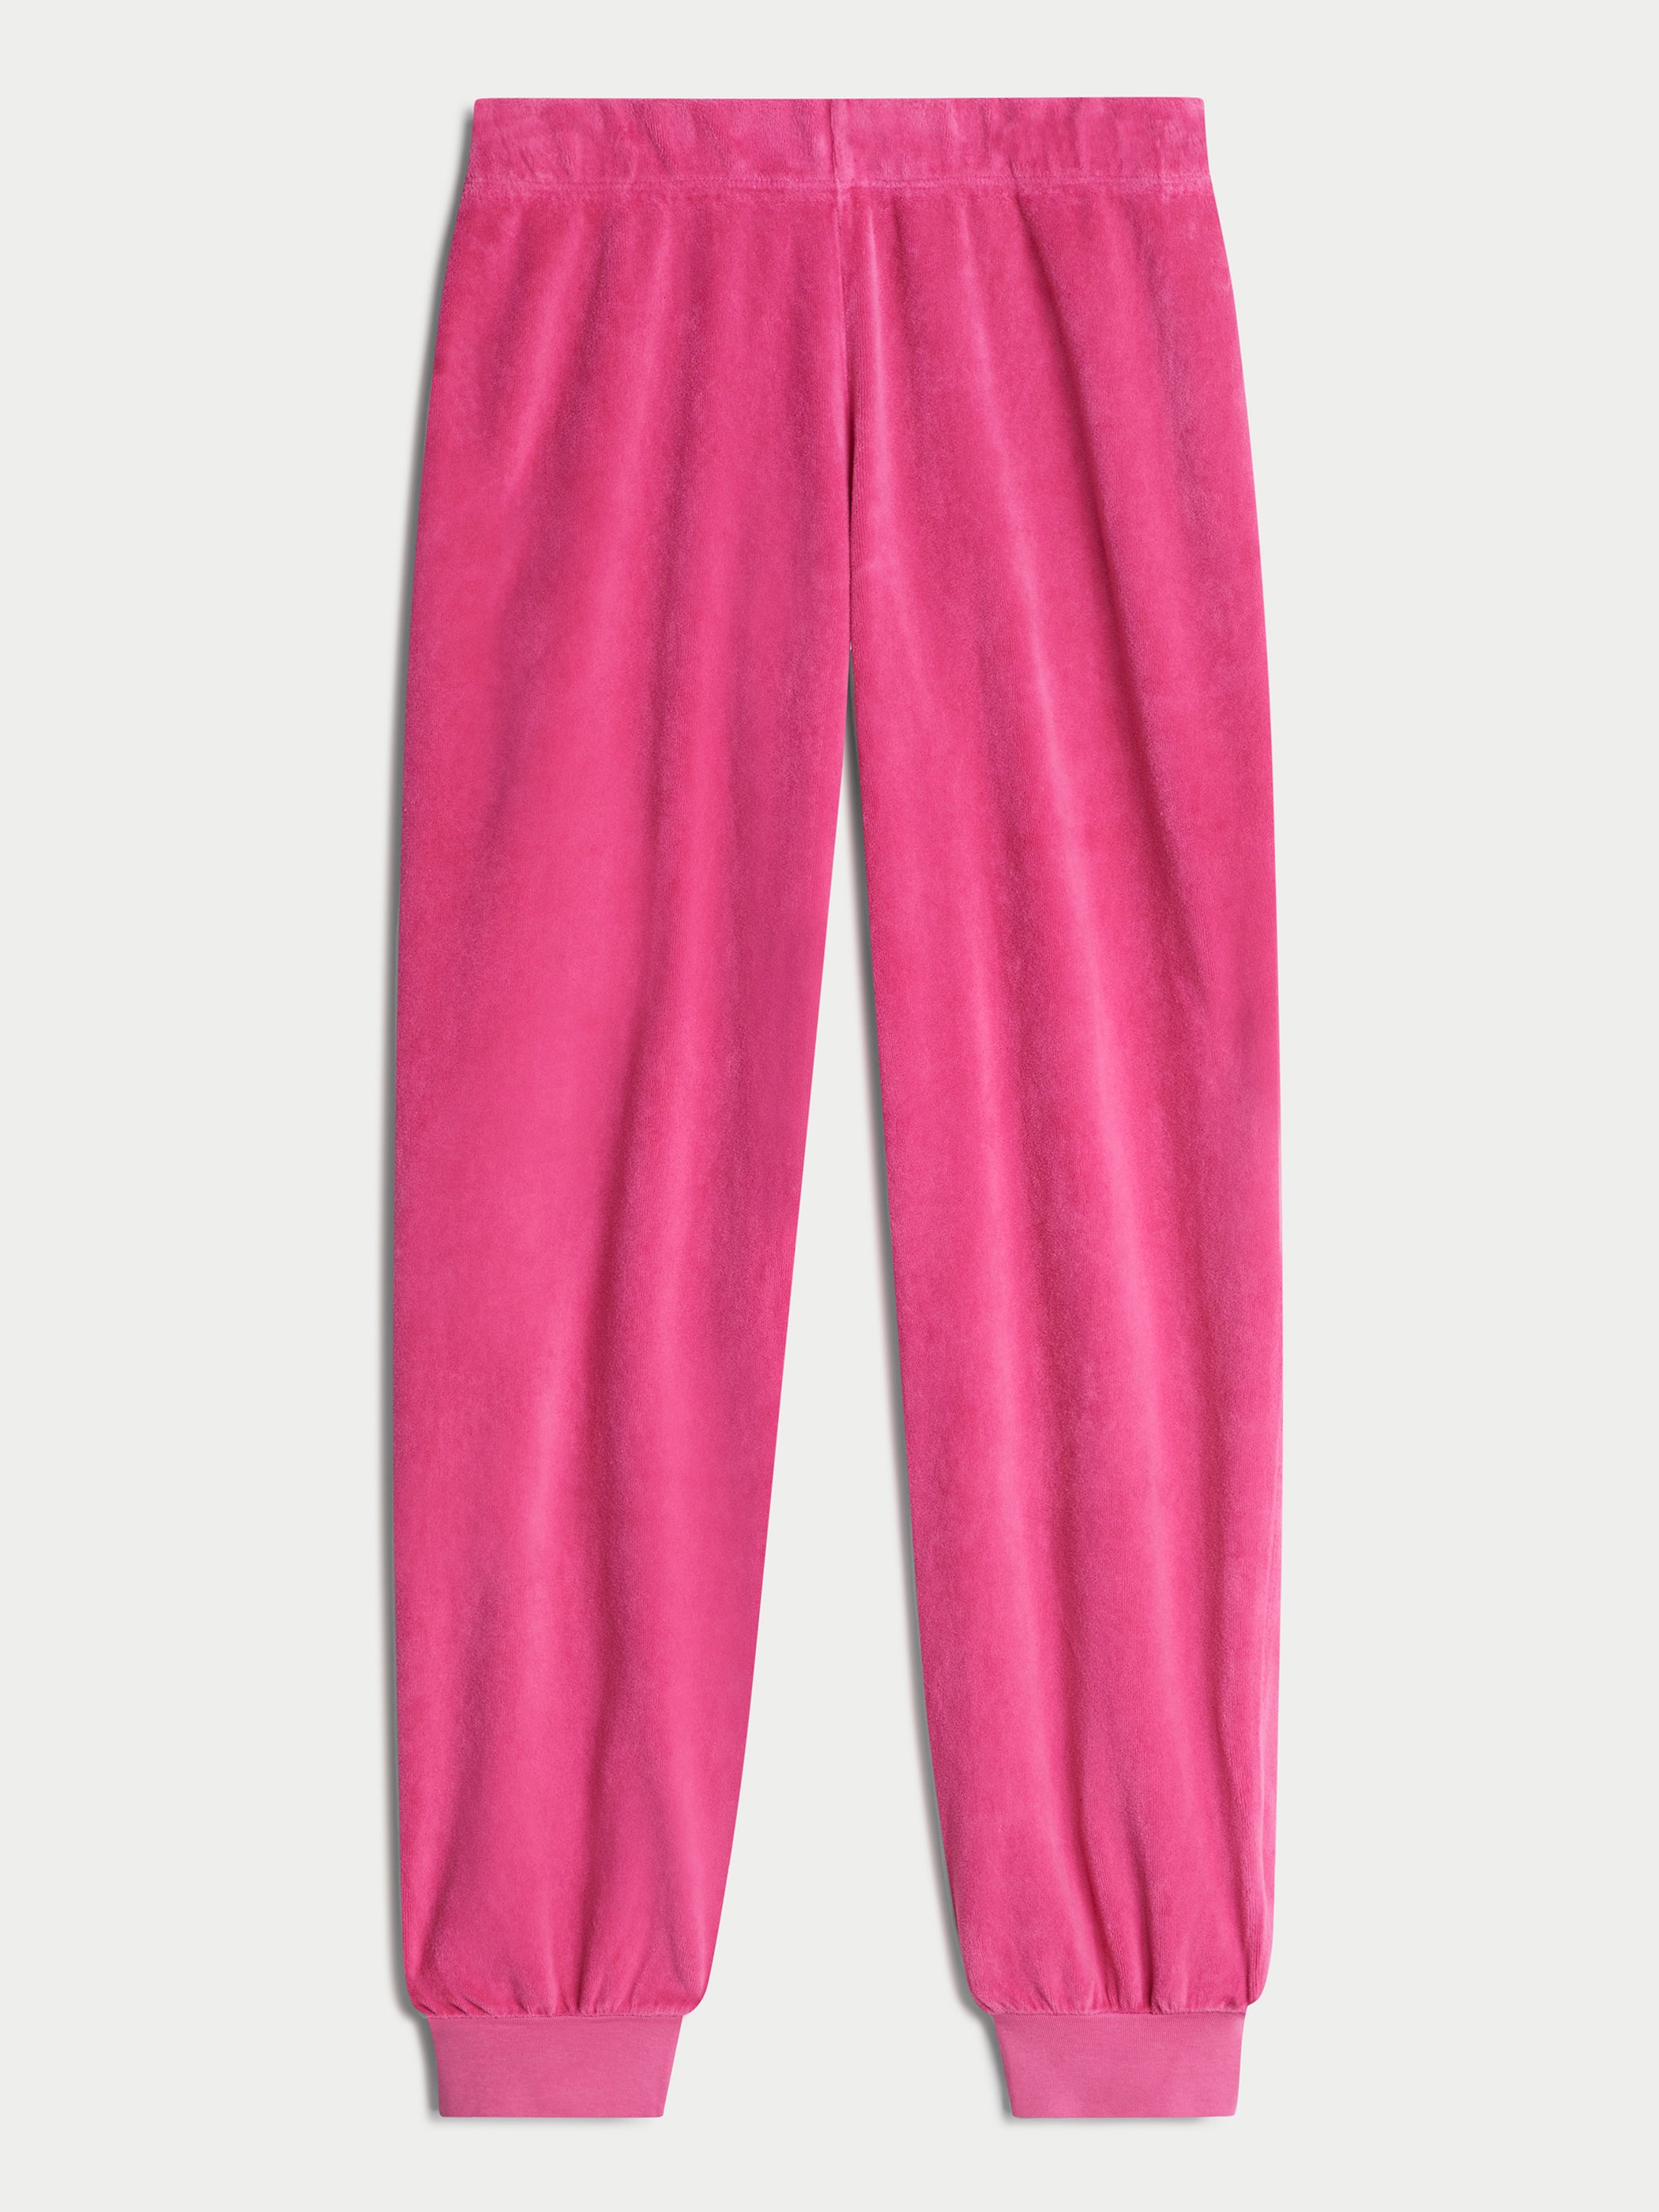 Hot Pink Velour Joggers Sweatpants Size Medium with Pockets